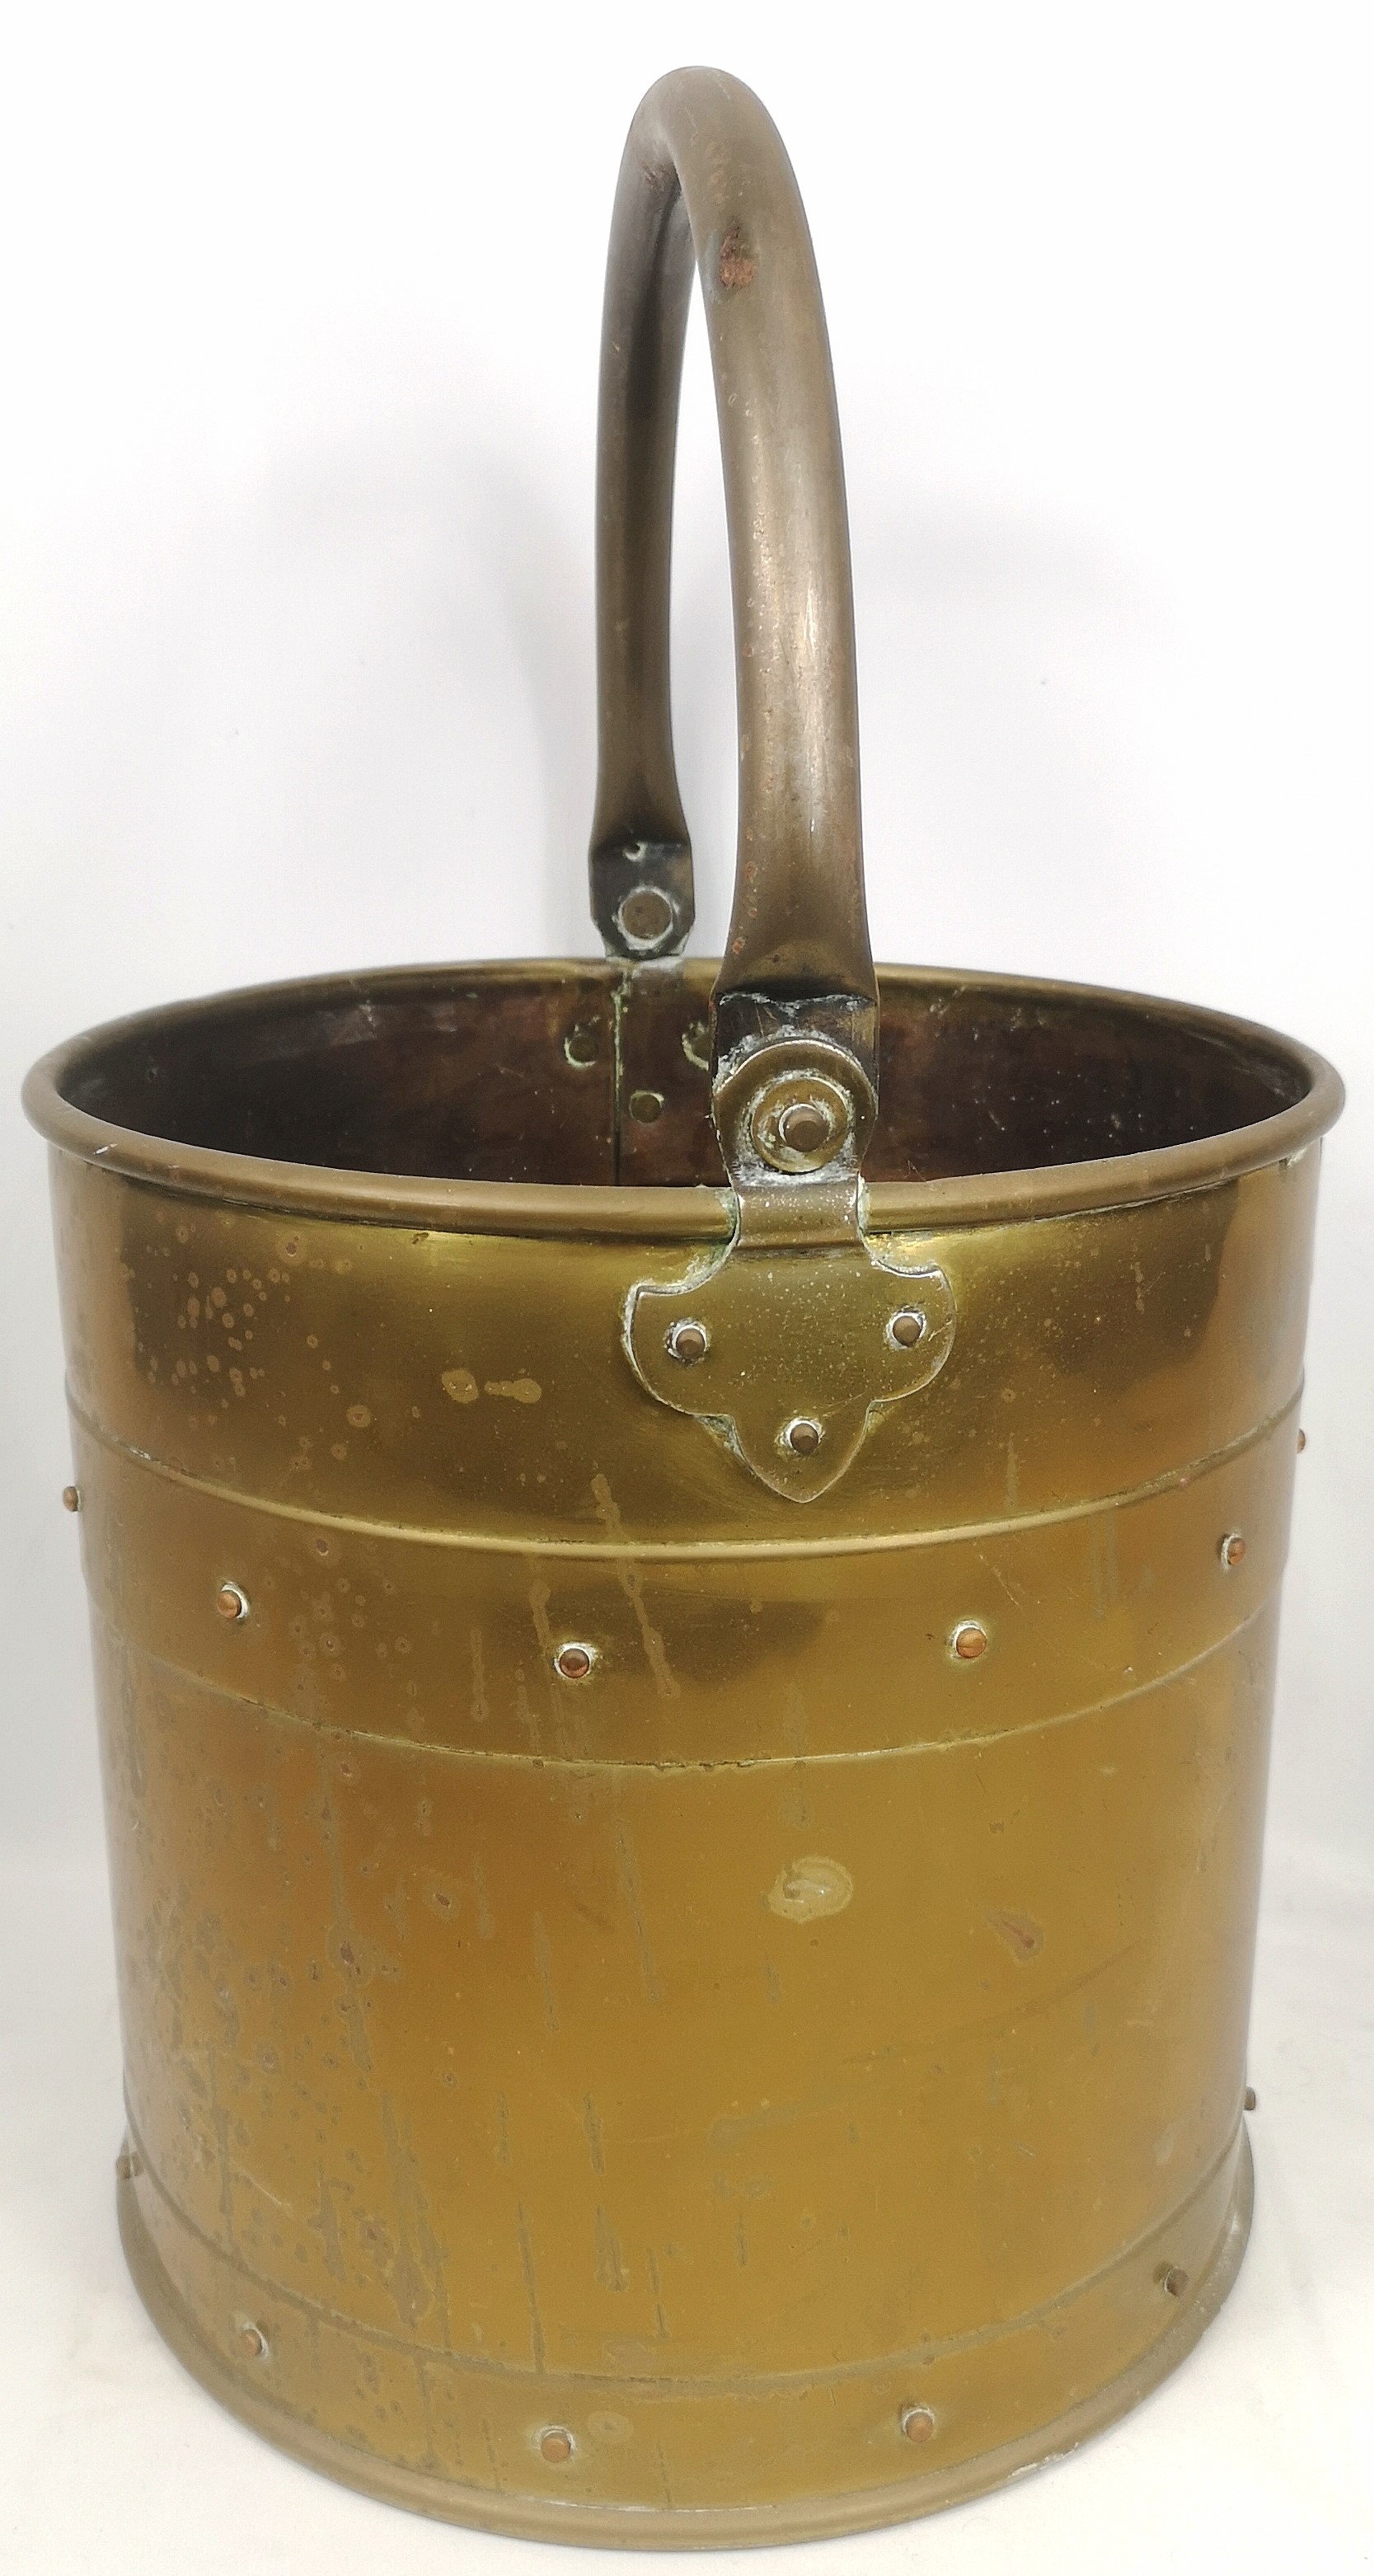 Brass pail with copper rivets - Image 2 of 4